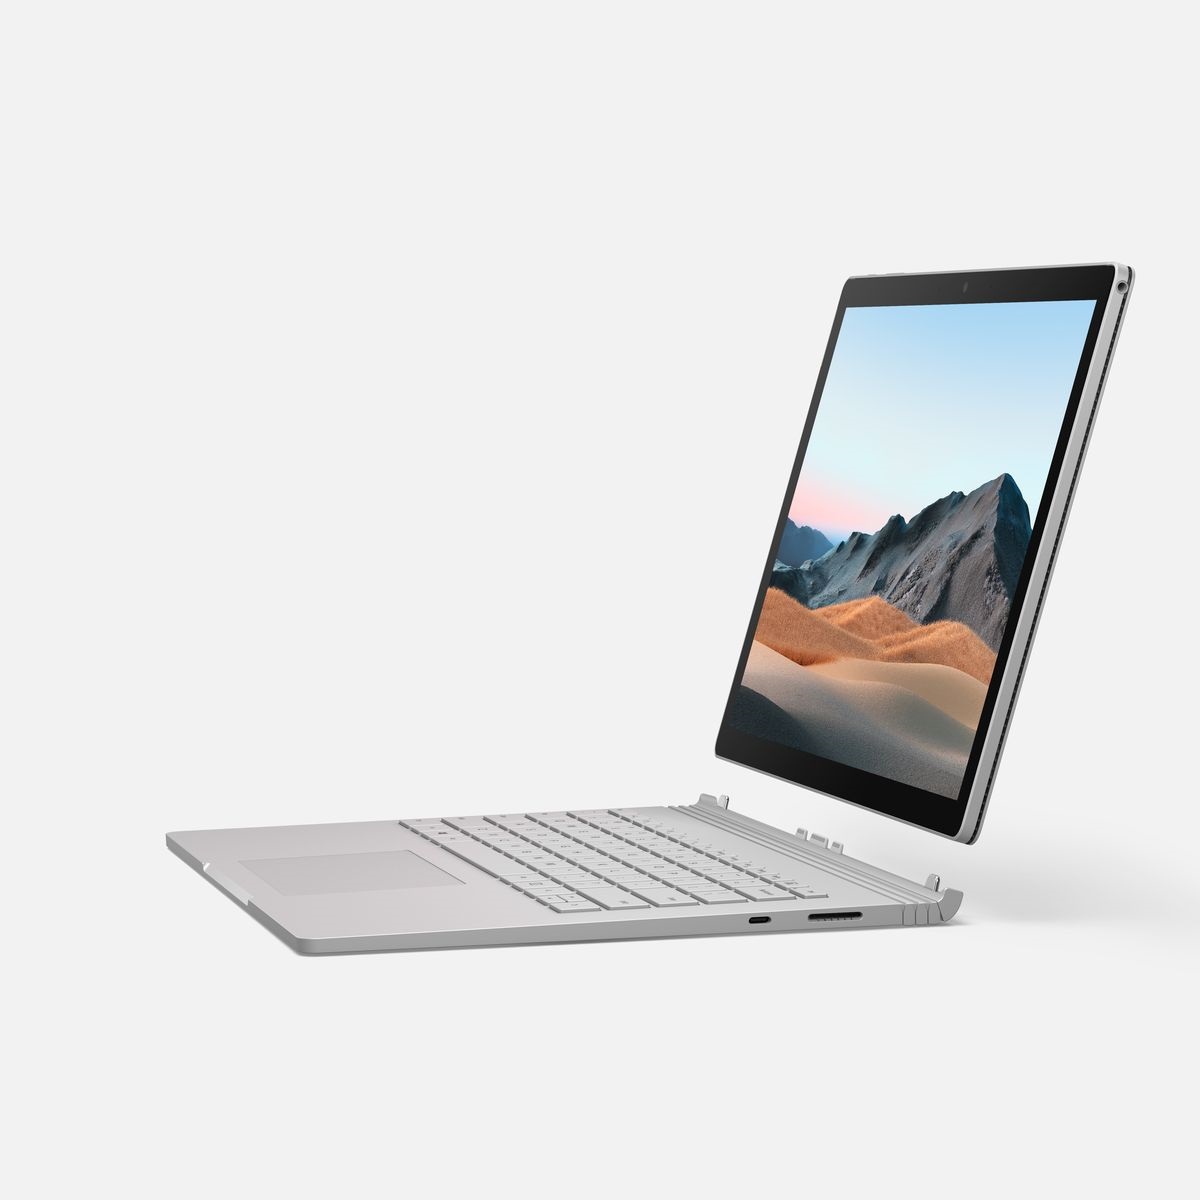 Microsoft Surface Book 3 All-in-One Business Laptop i7 1065G7 10th Gen/32GB/1TB SSD/NVIDIA GeForce GTX 1650 4GB/13.5-inch Display/Windows 10/Platinum